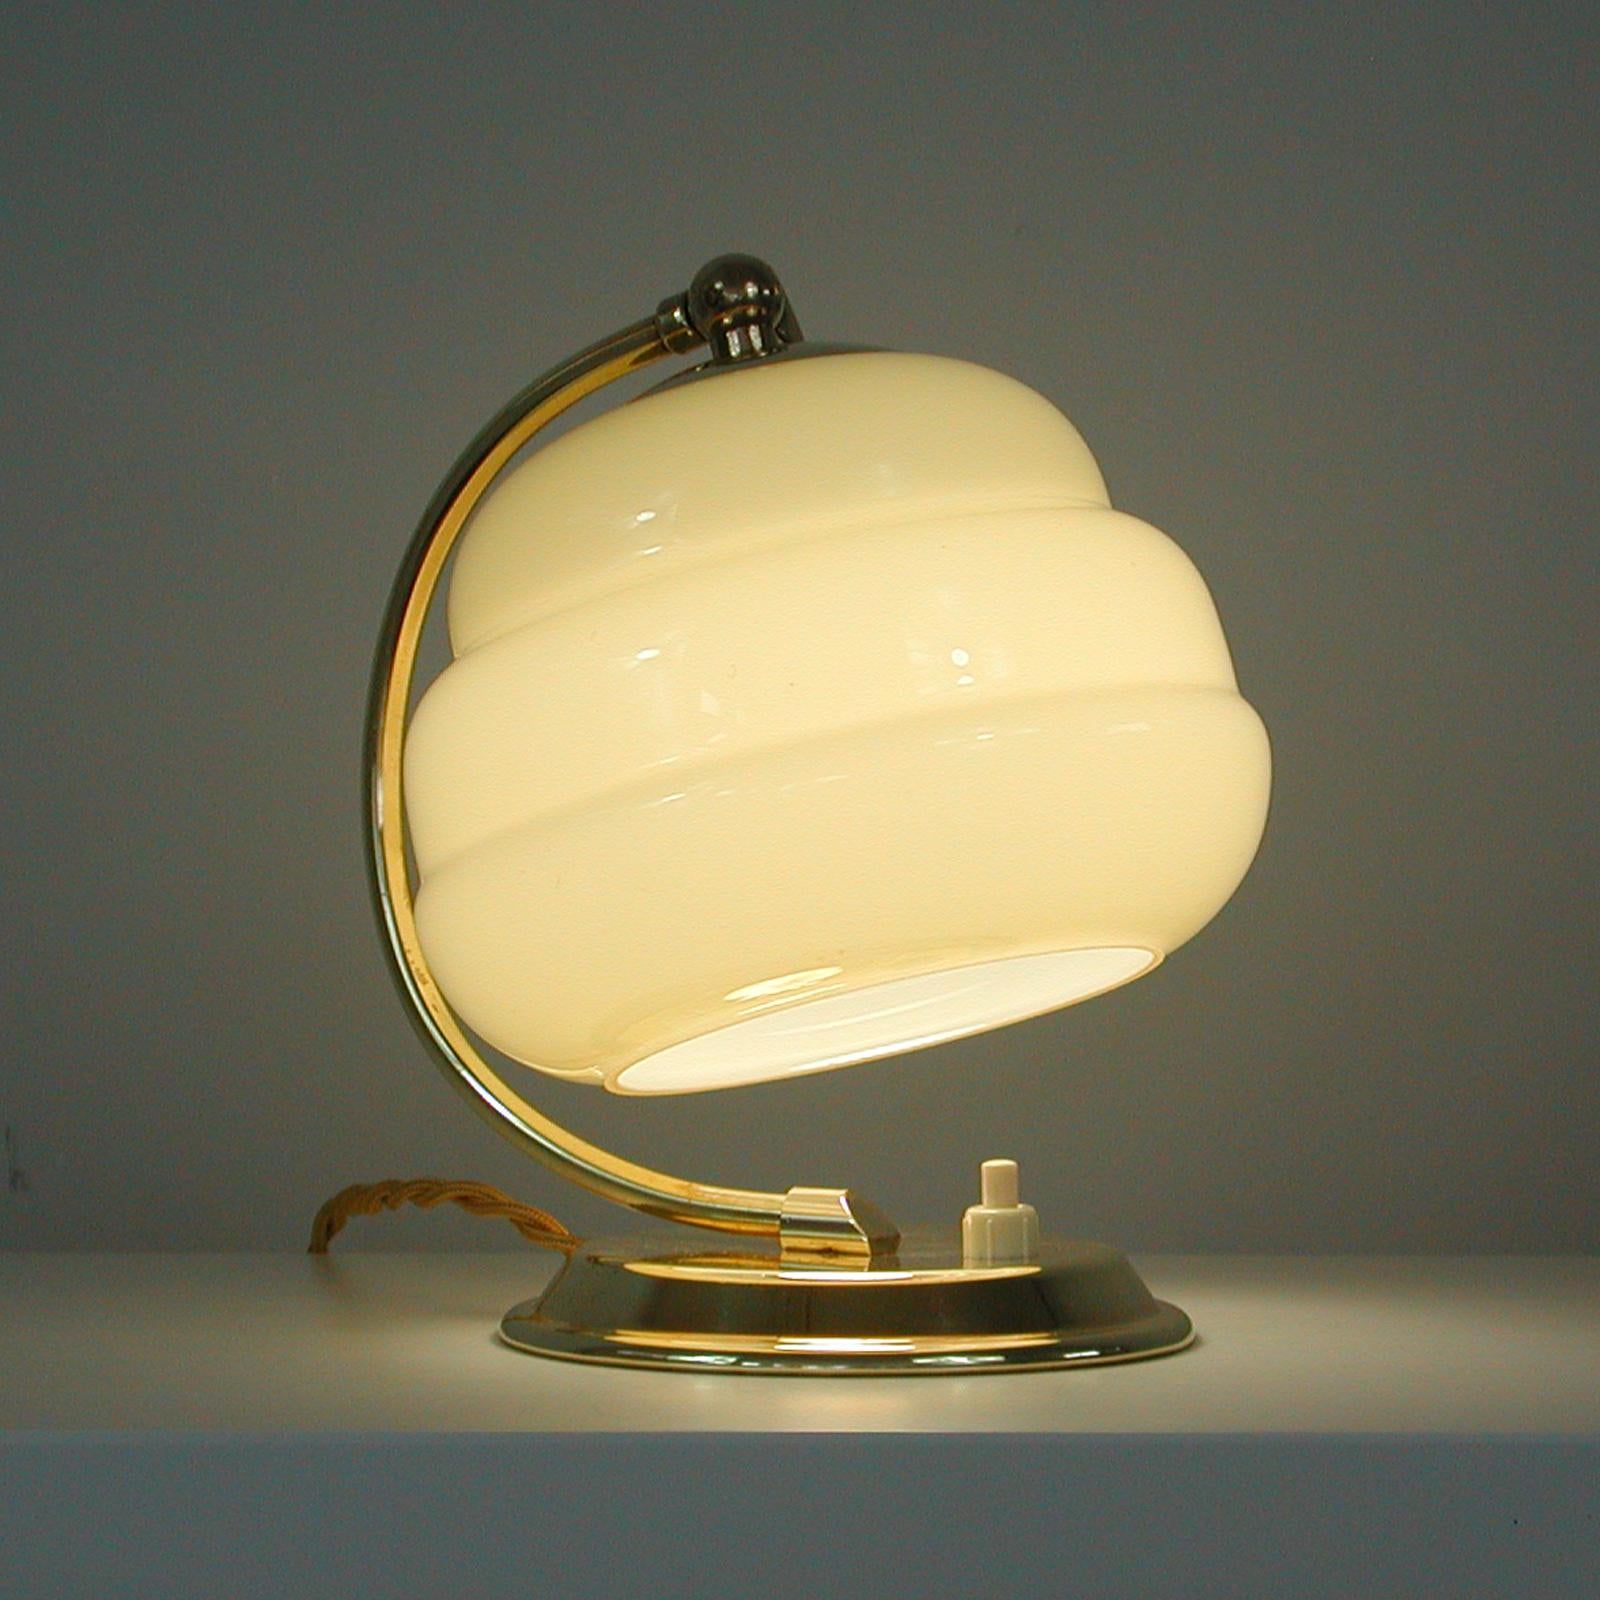 German Art Deco Bauhaus Brass and Opaline Table Lamp, 1930s For Sale 3